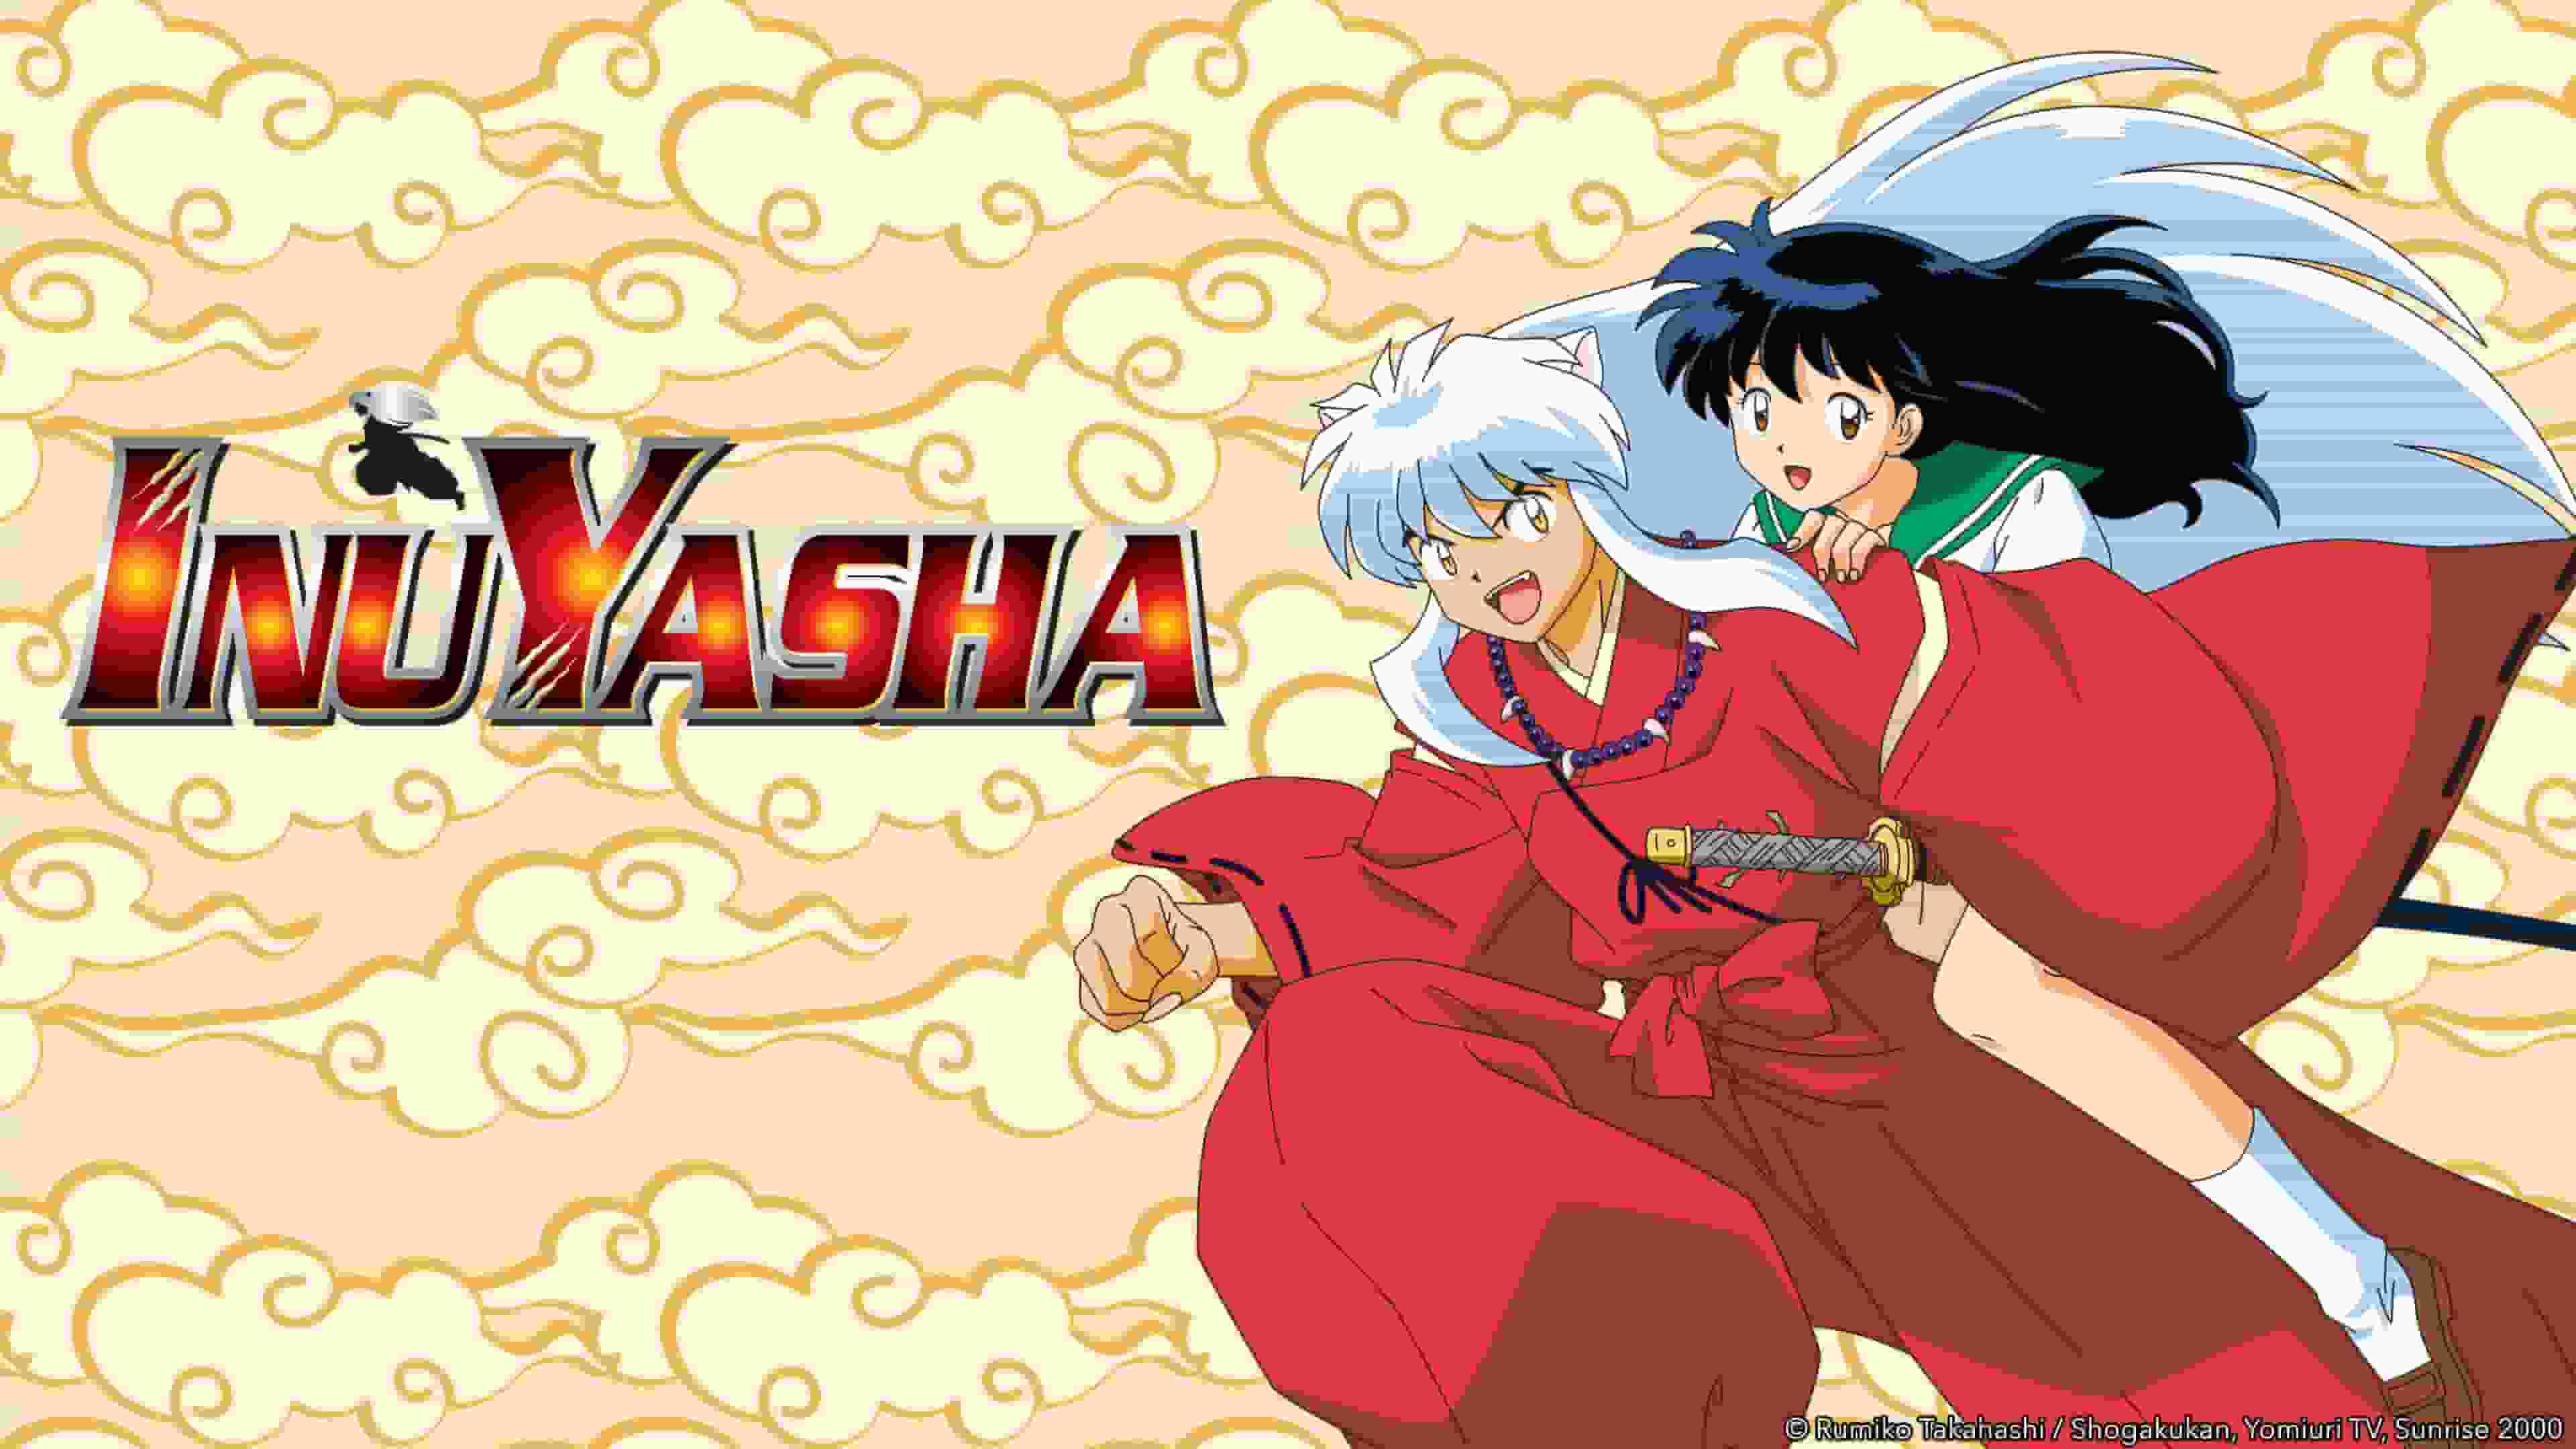 Title art for time travel anime show InuYasha